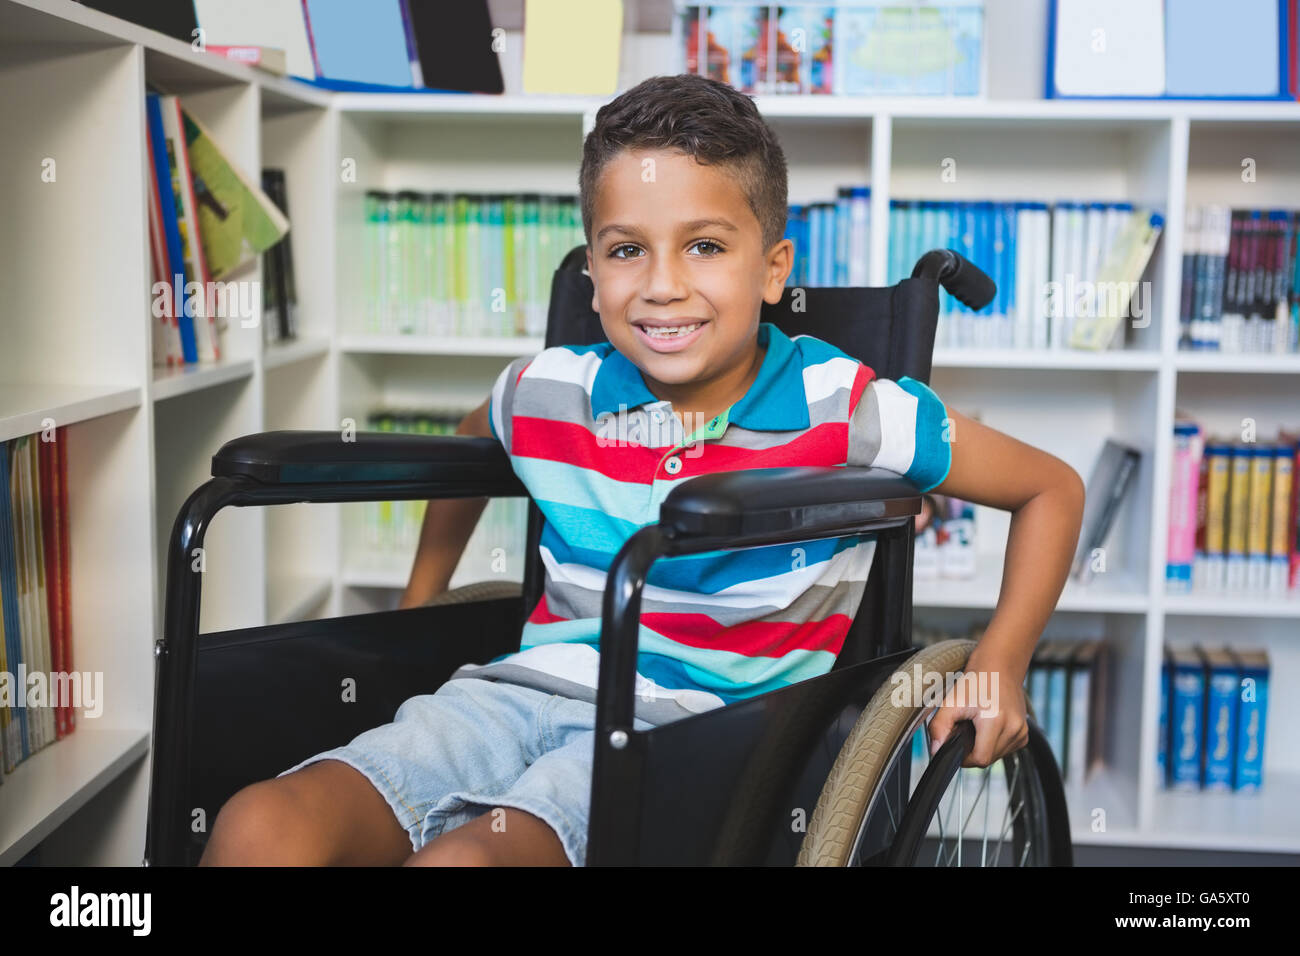 Disabled schoolboy in library Stock Photo